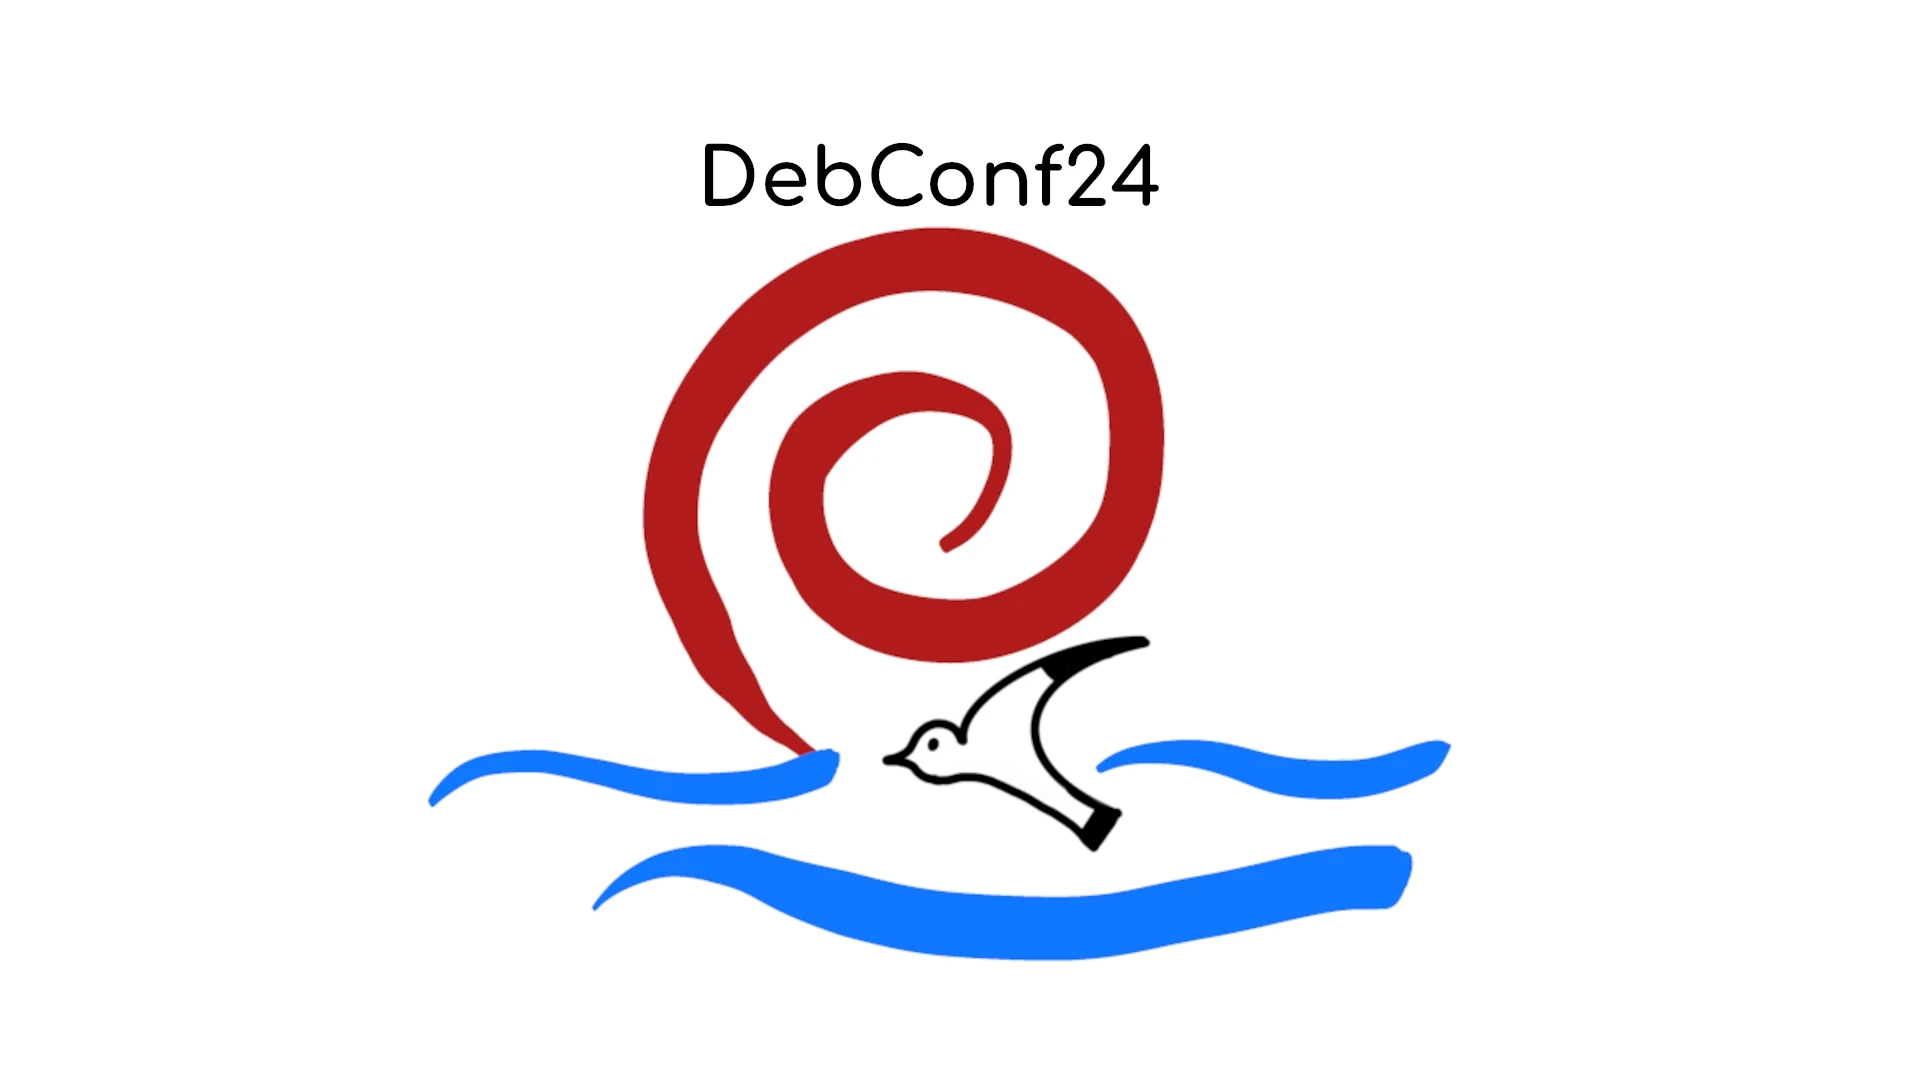 Details of DebConf24 Debian Conference Scheduled in South Korea from July 28 to August 4